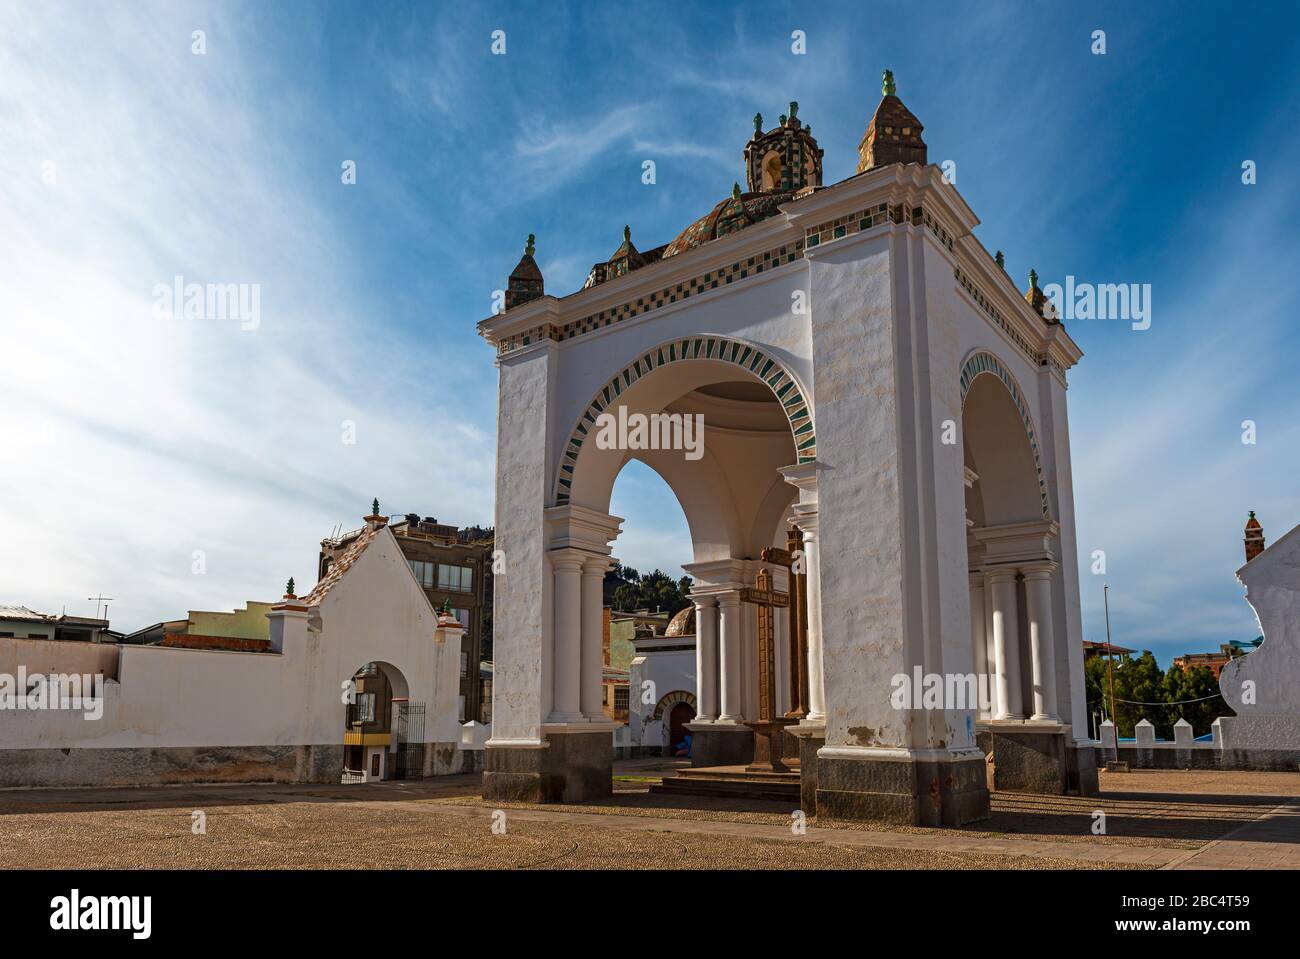 Arch construction on the square in front of the Basilica of Our Lady of Copacabana at sunset, Copacabana city, Bolivia. Stock Photo